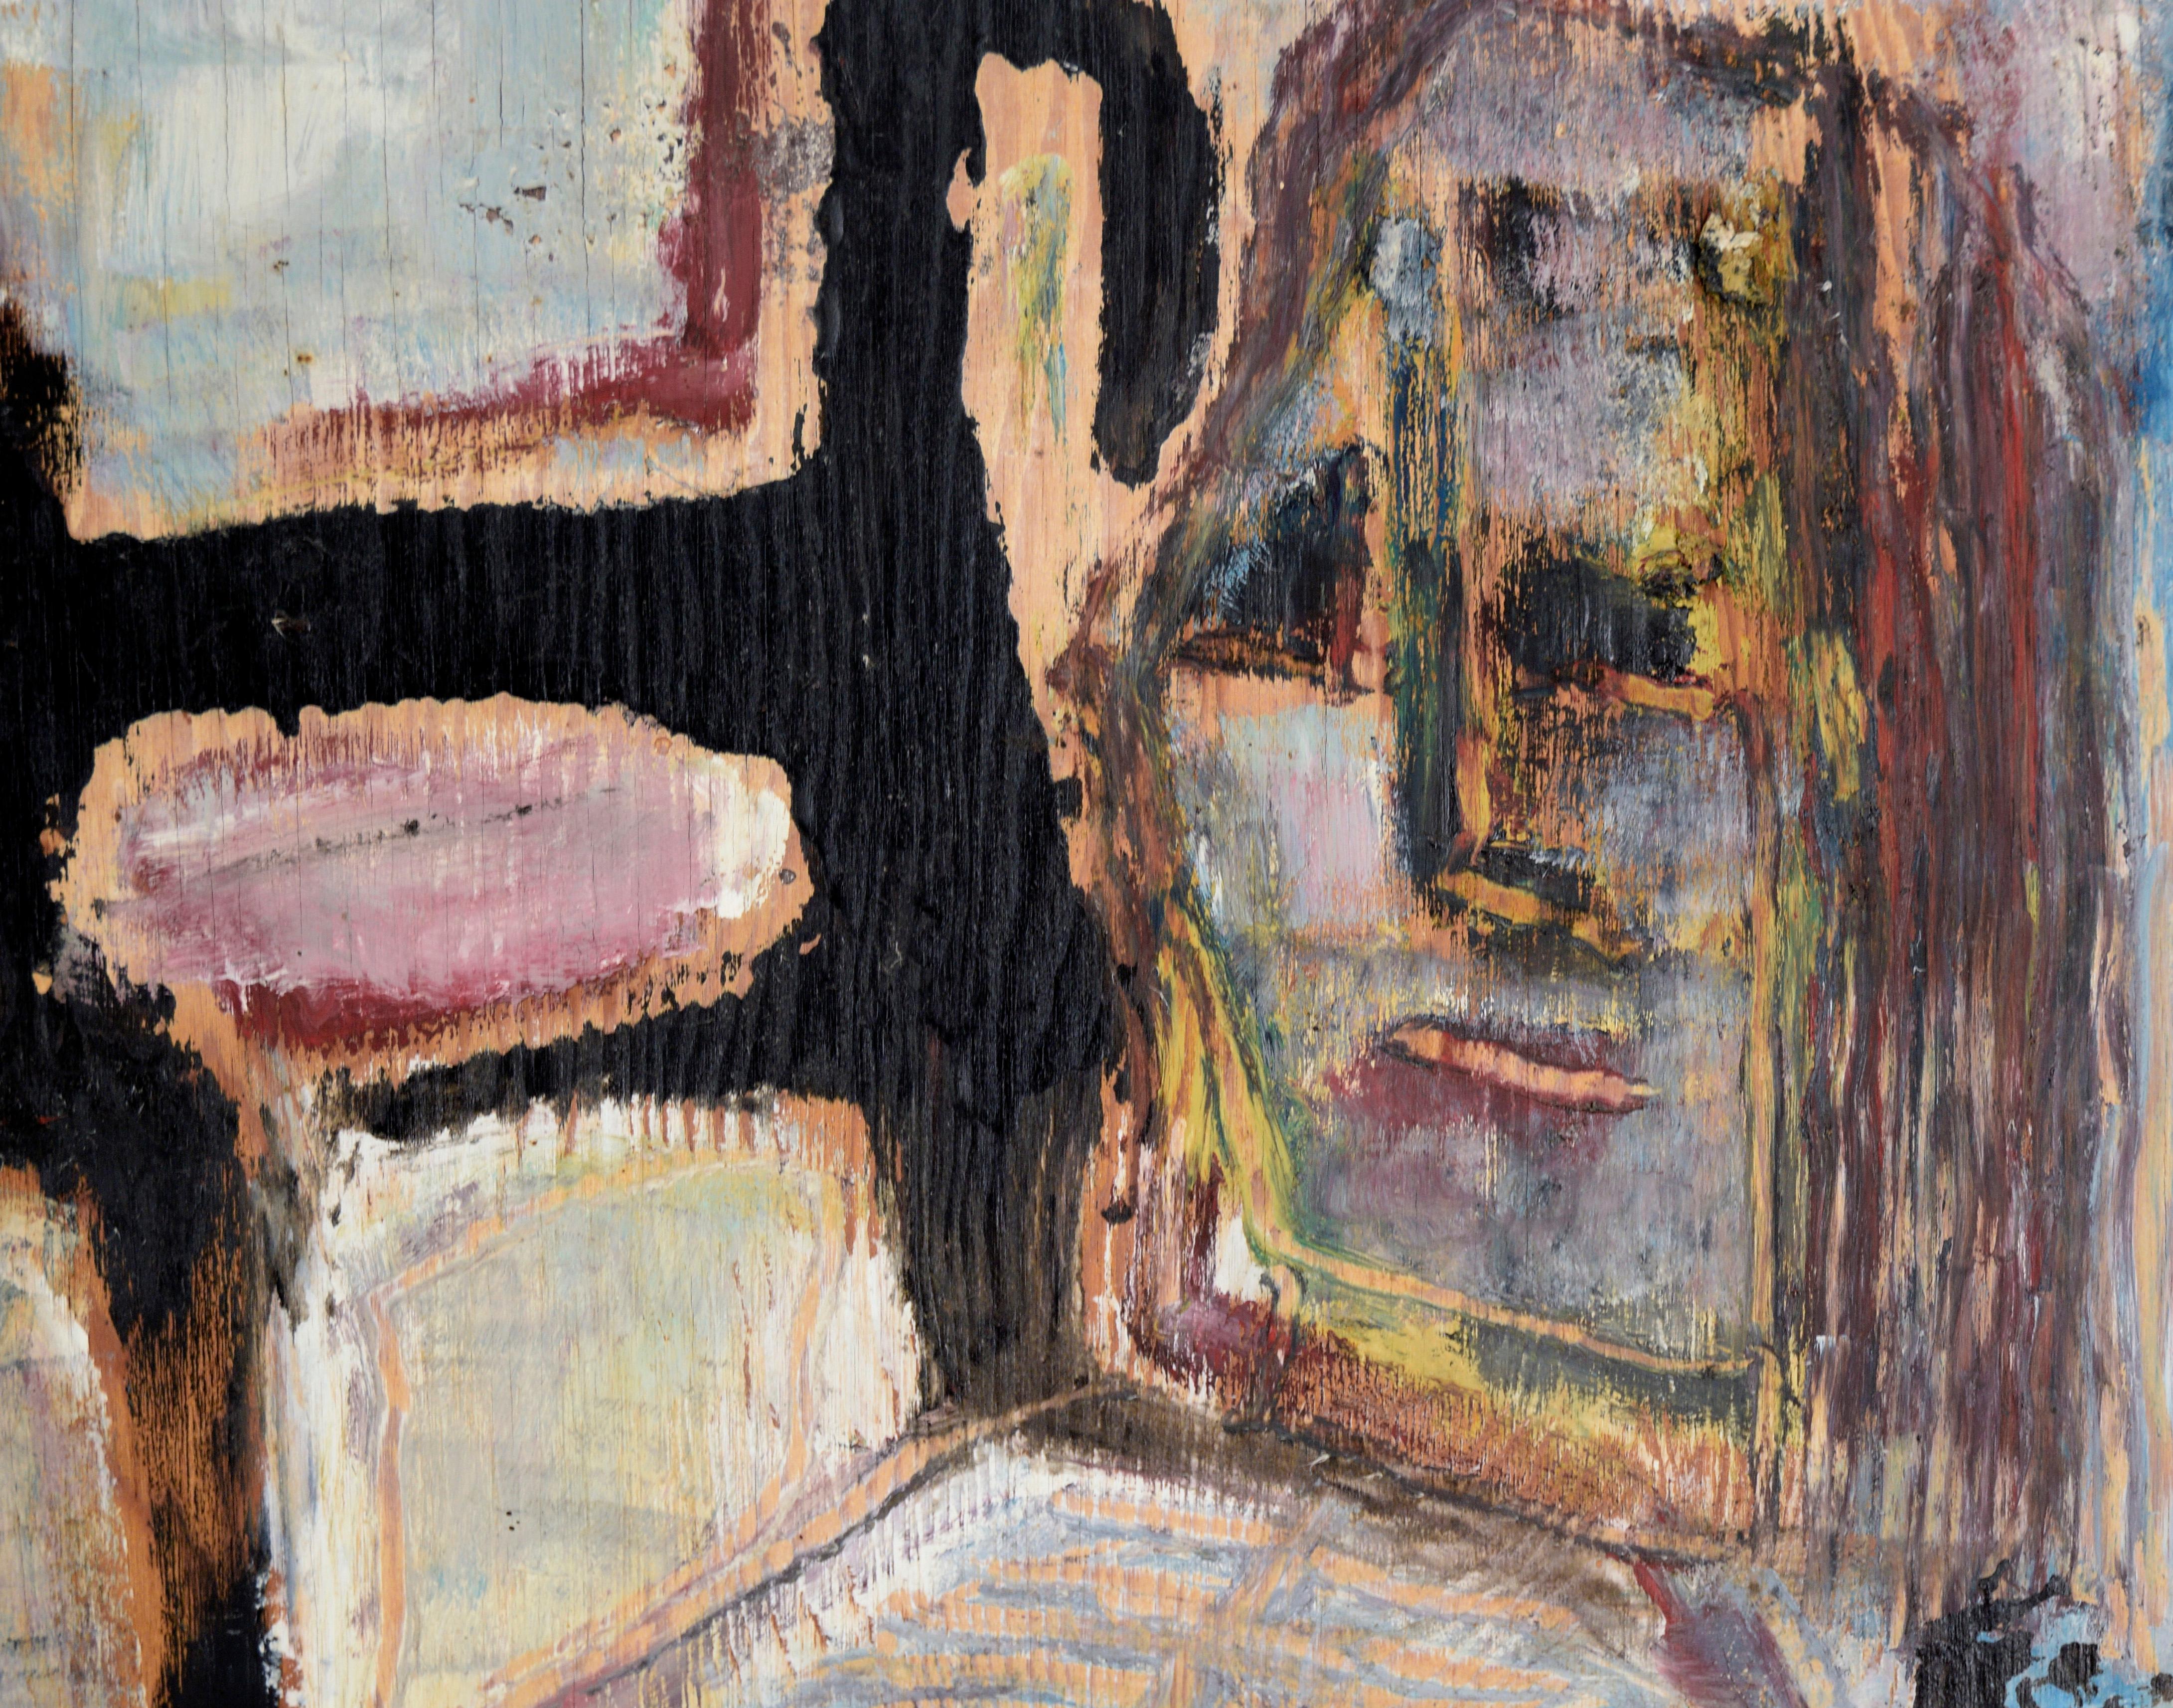 Faces on the Bus San Francisco Abstracted Figurative Composition in Oil on Board 3